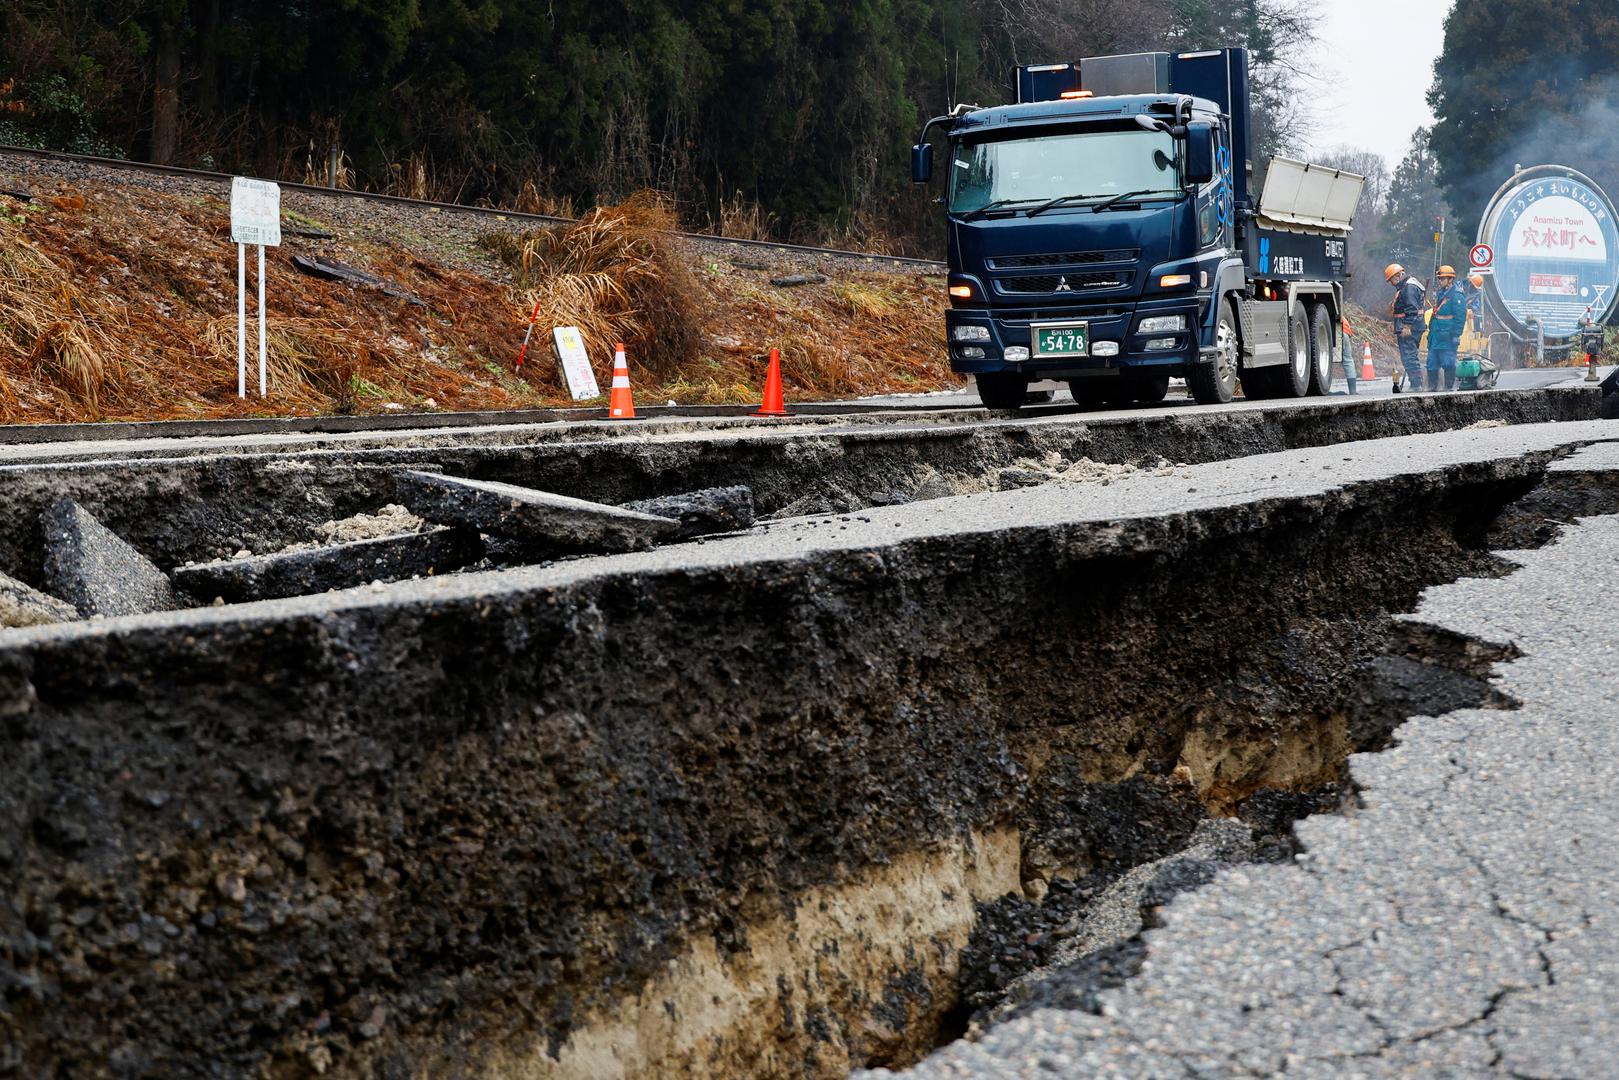 Workers repair a damaged road, in the aftermath of an earthquake, near Anamizu, Japan, January 3, 2024. REUTERS/Kim Kyung-Hoon Photo: KIM KYUNG-HOON/REUTERS